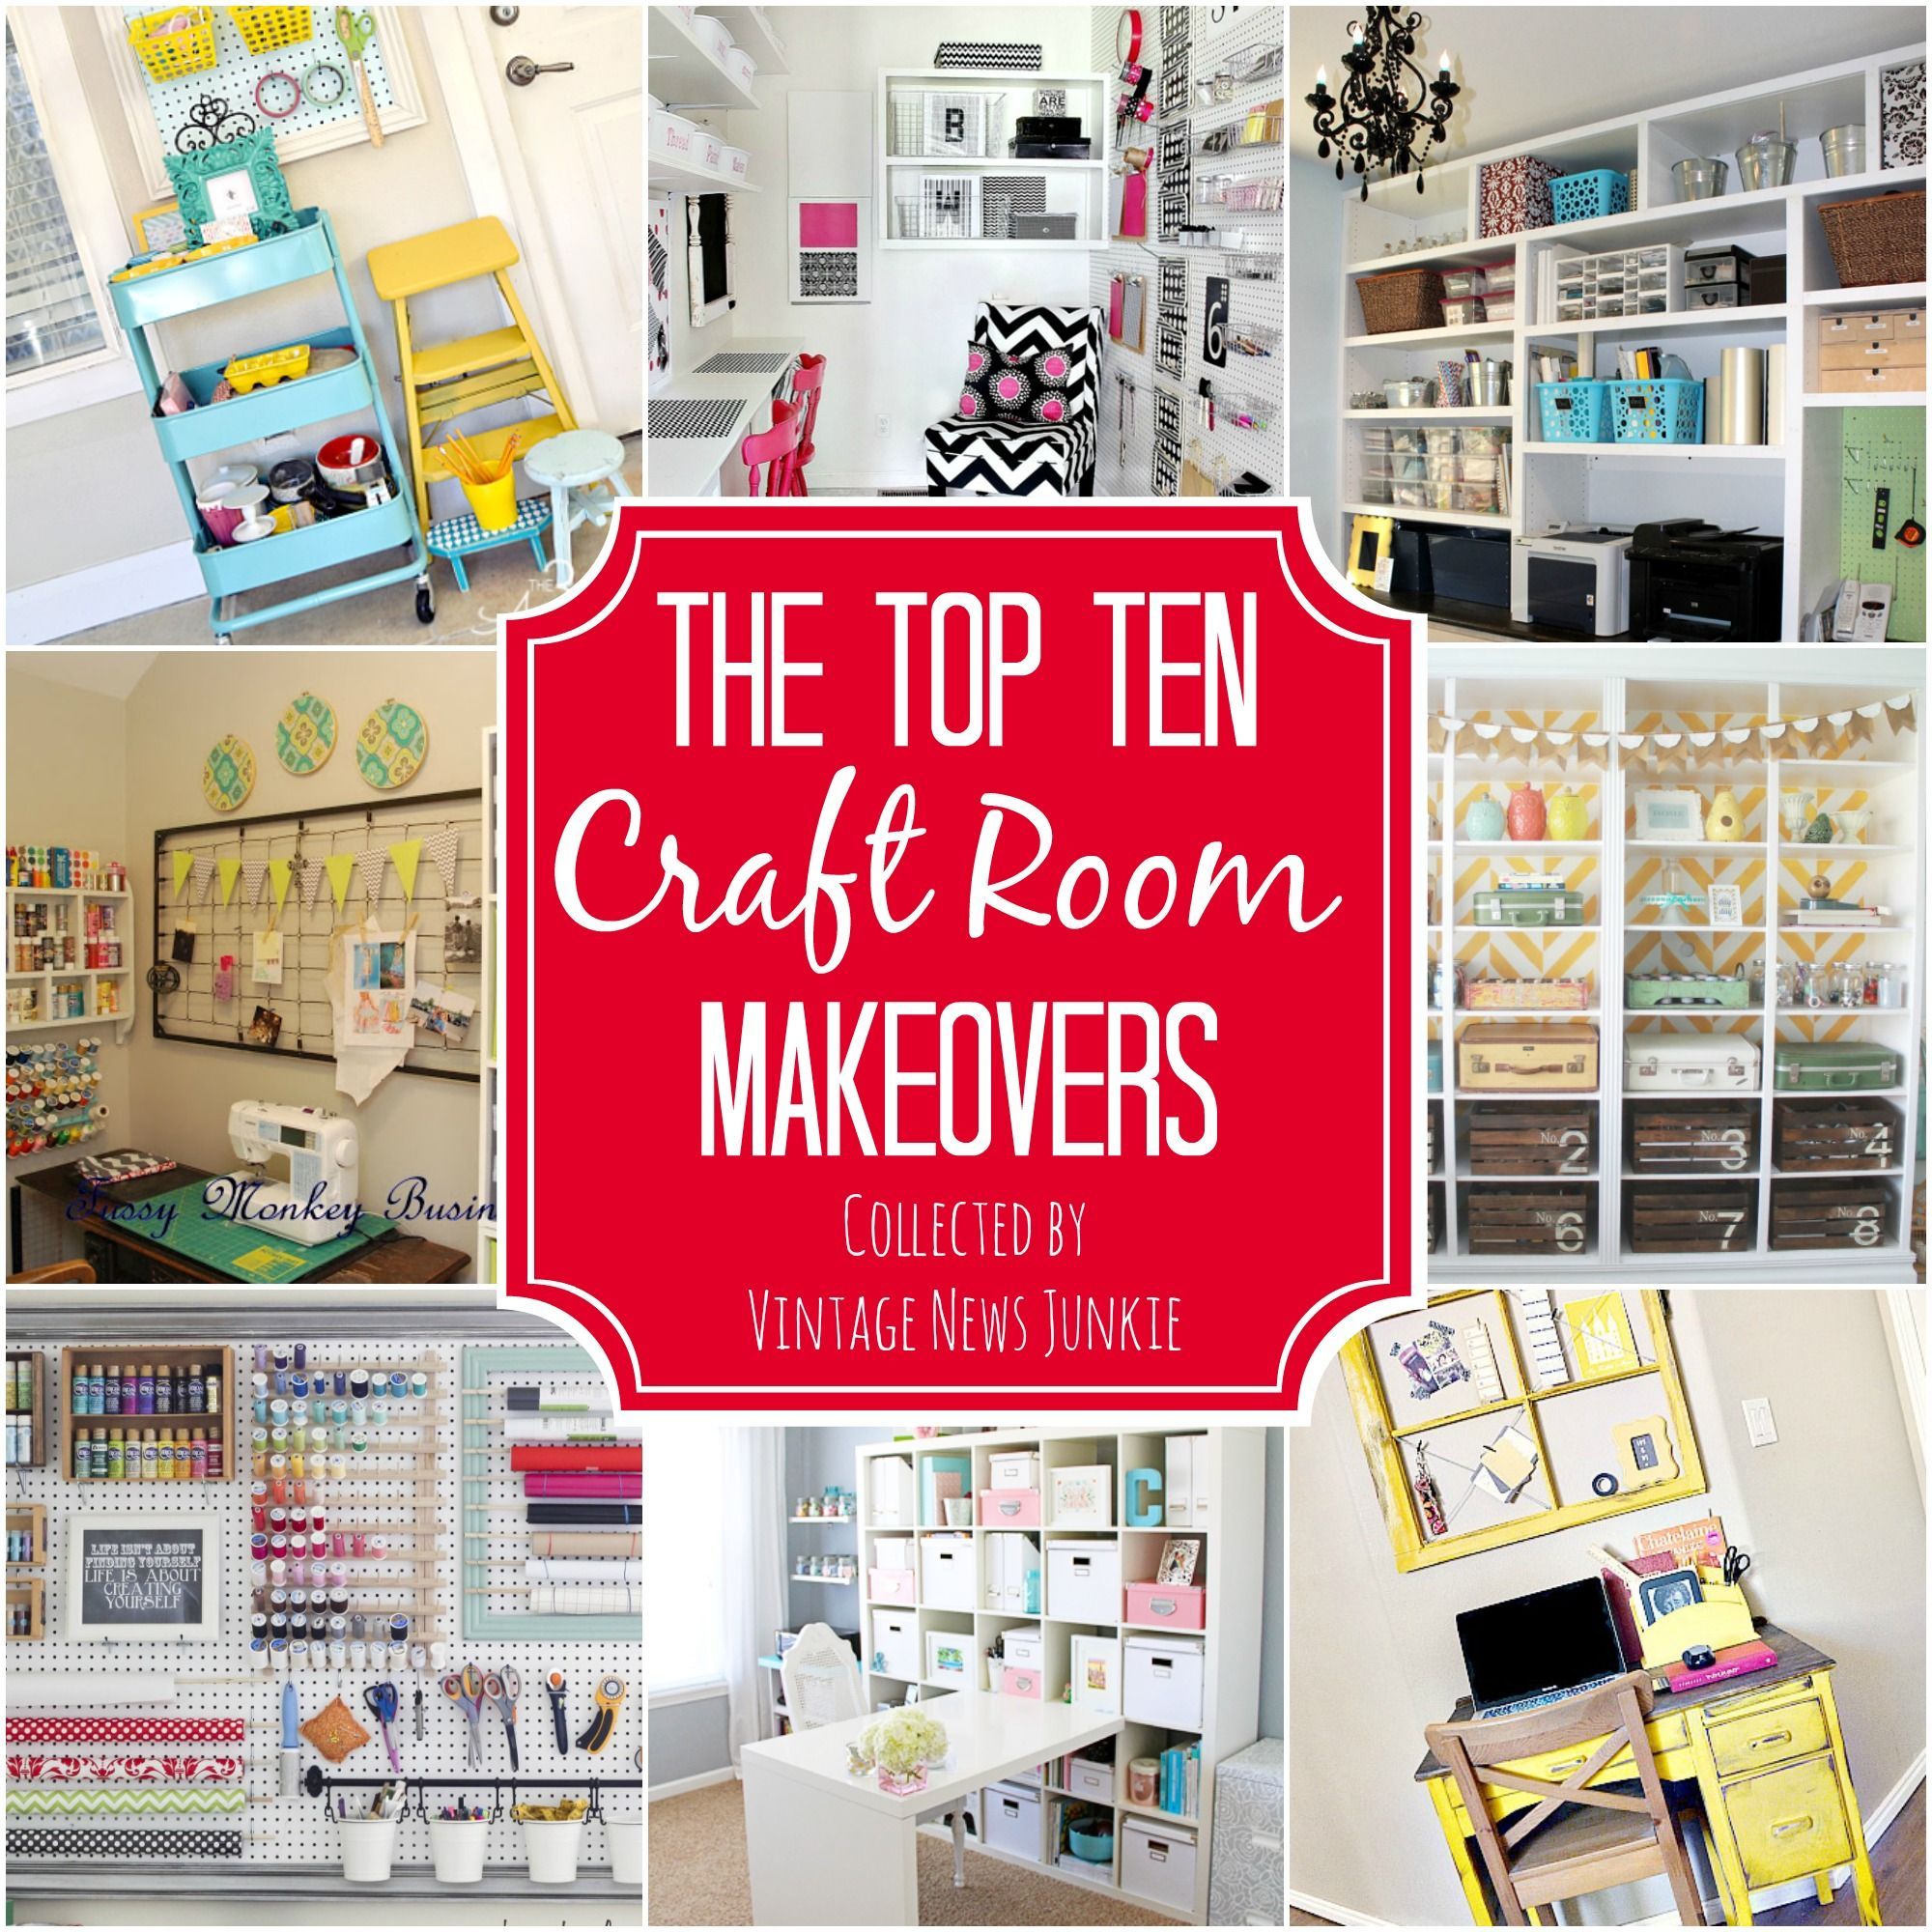 Awesome Inspiration & Organization Ideas for a Craft Room #organization ...